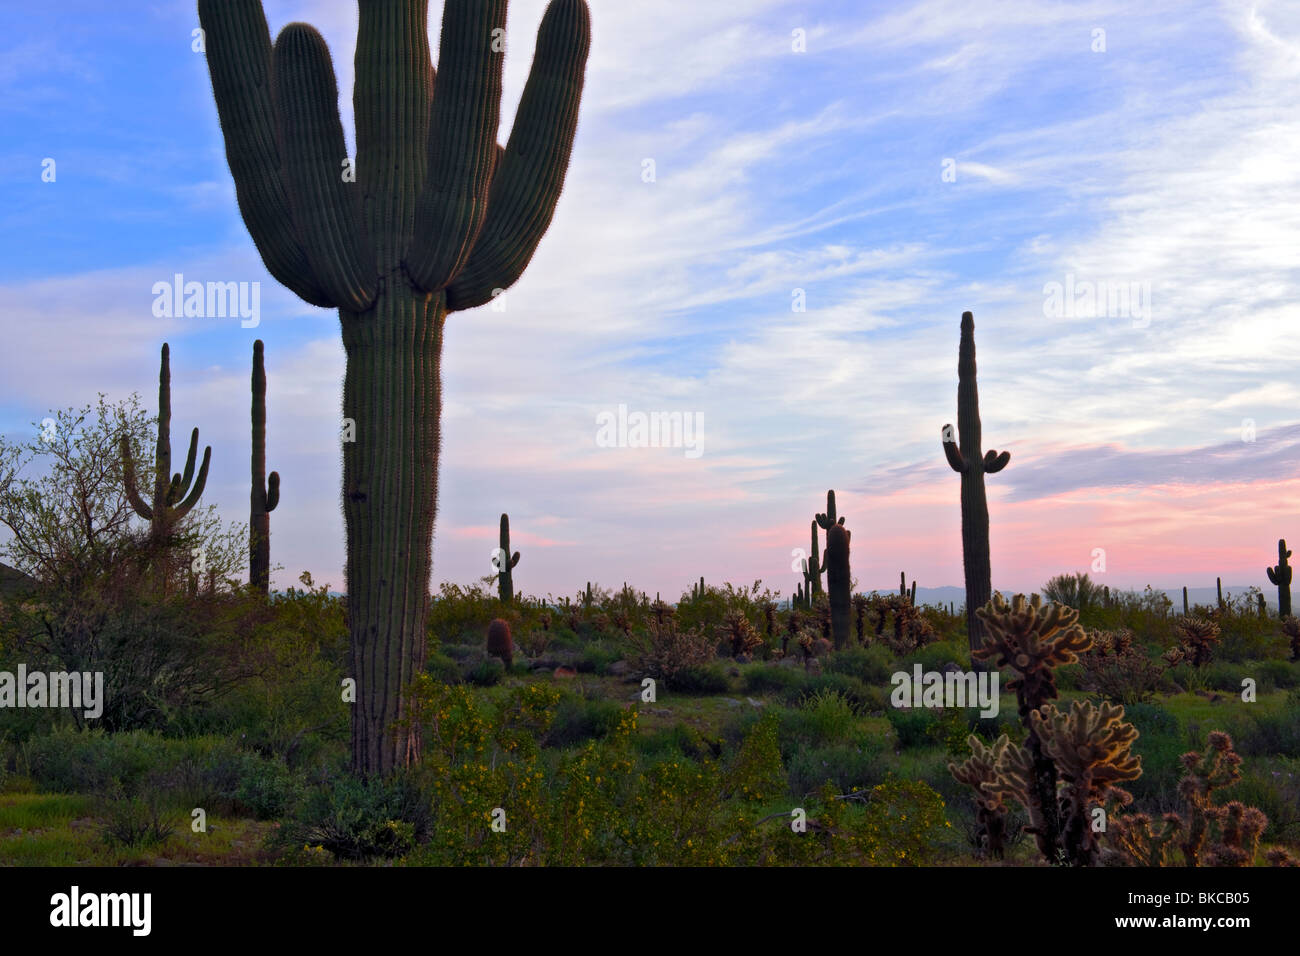 Saguaro cactus stand tall at first light in Arizona's White Tank Mountains Regional Park west of Phoenix. Stock Photo